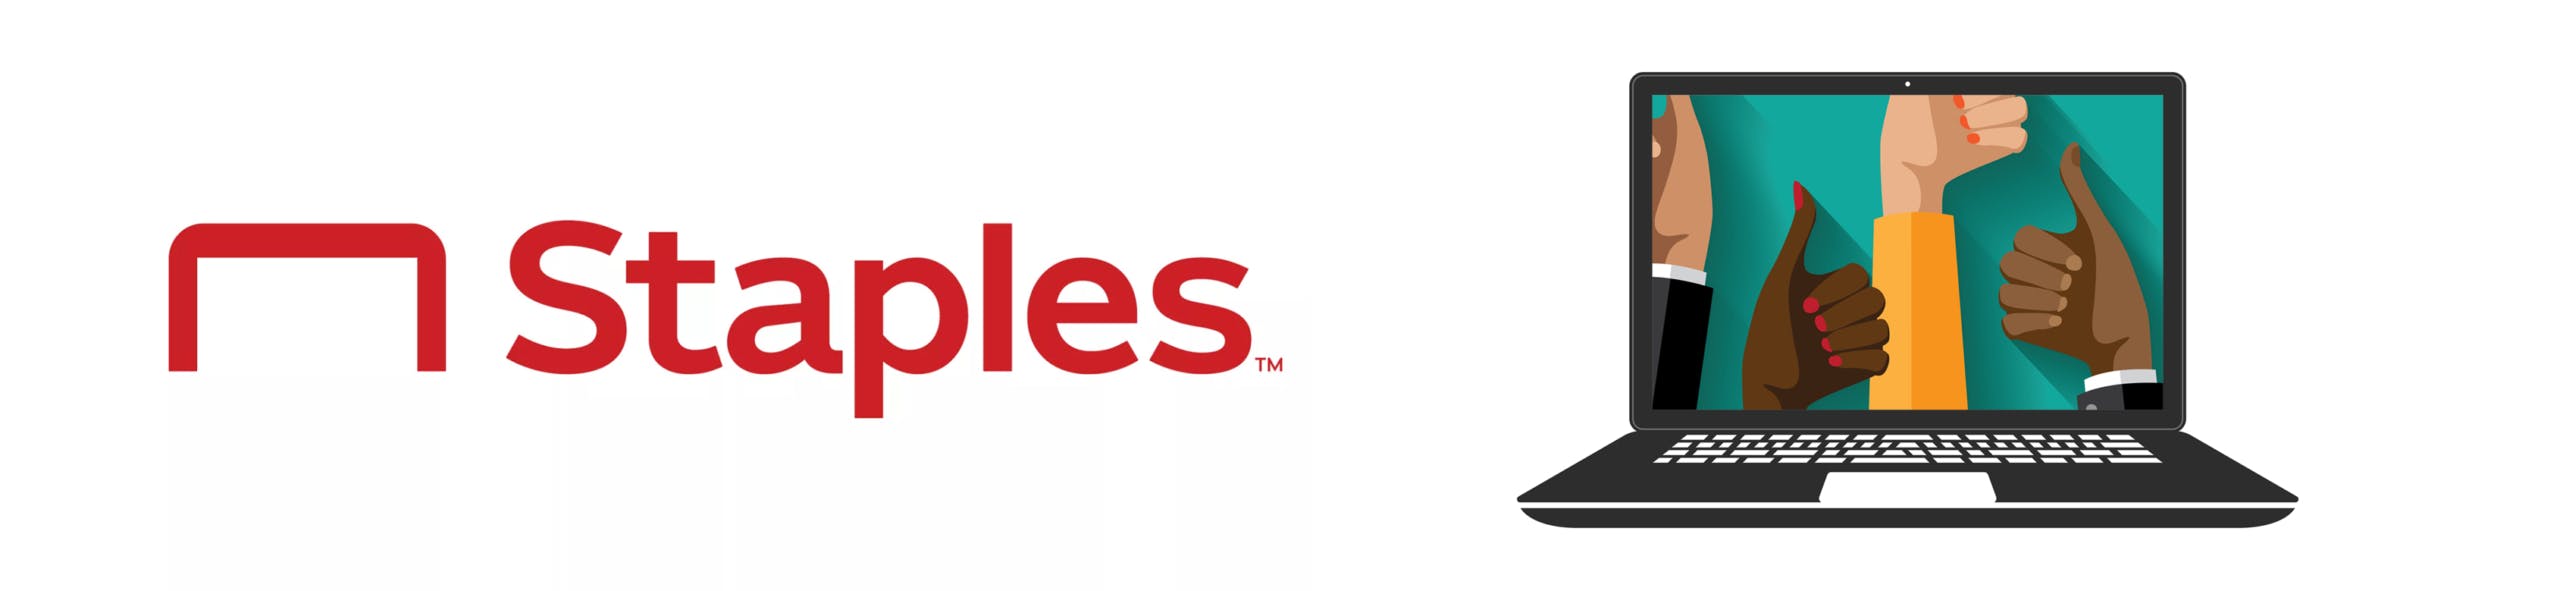 Staples logo next to a laptop with thumbs pointing up